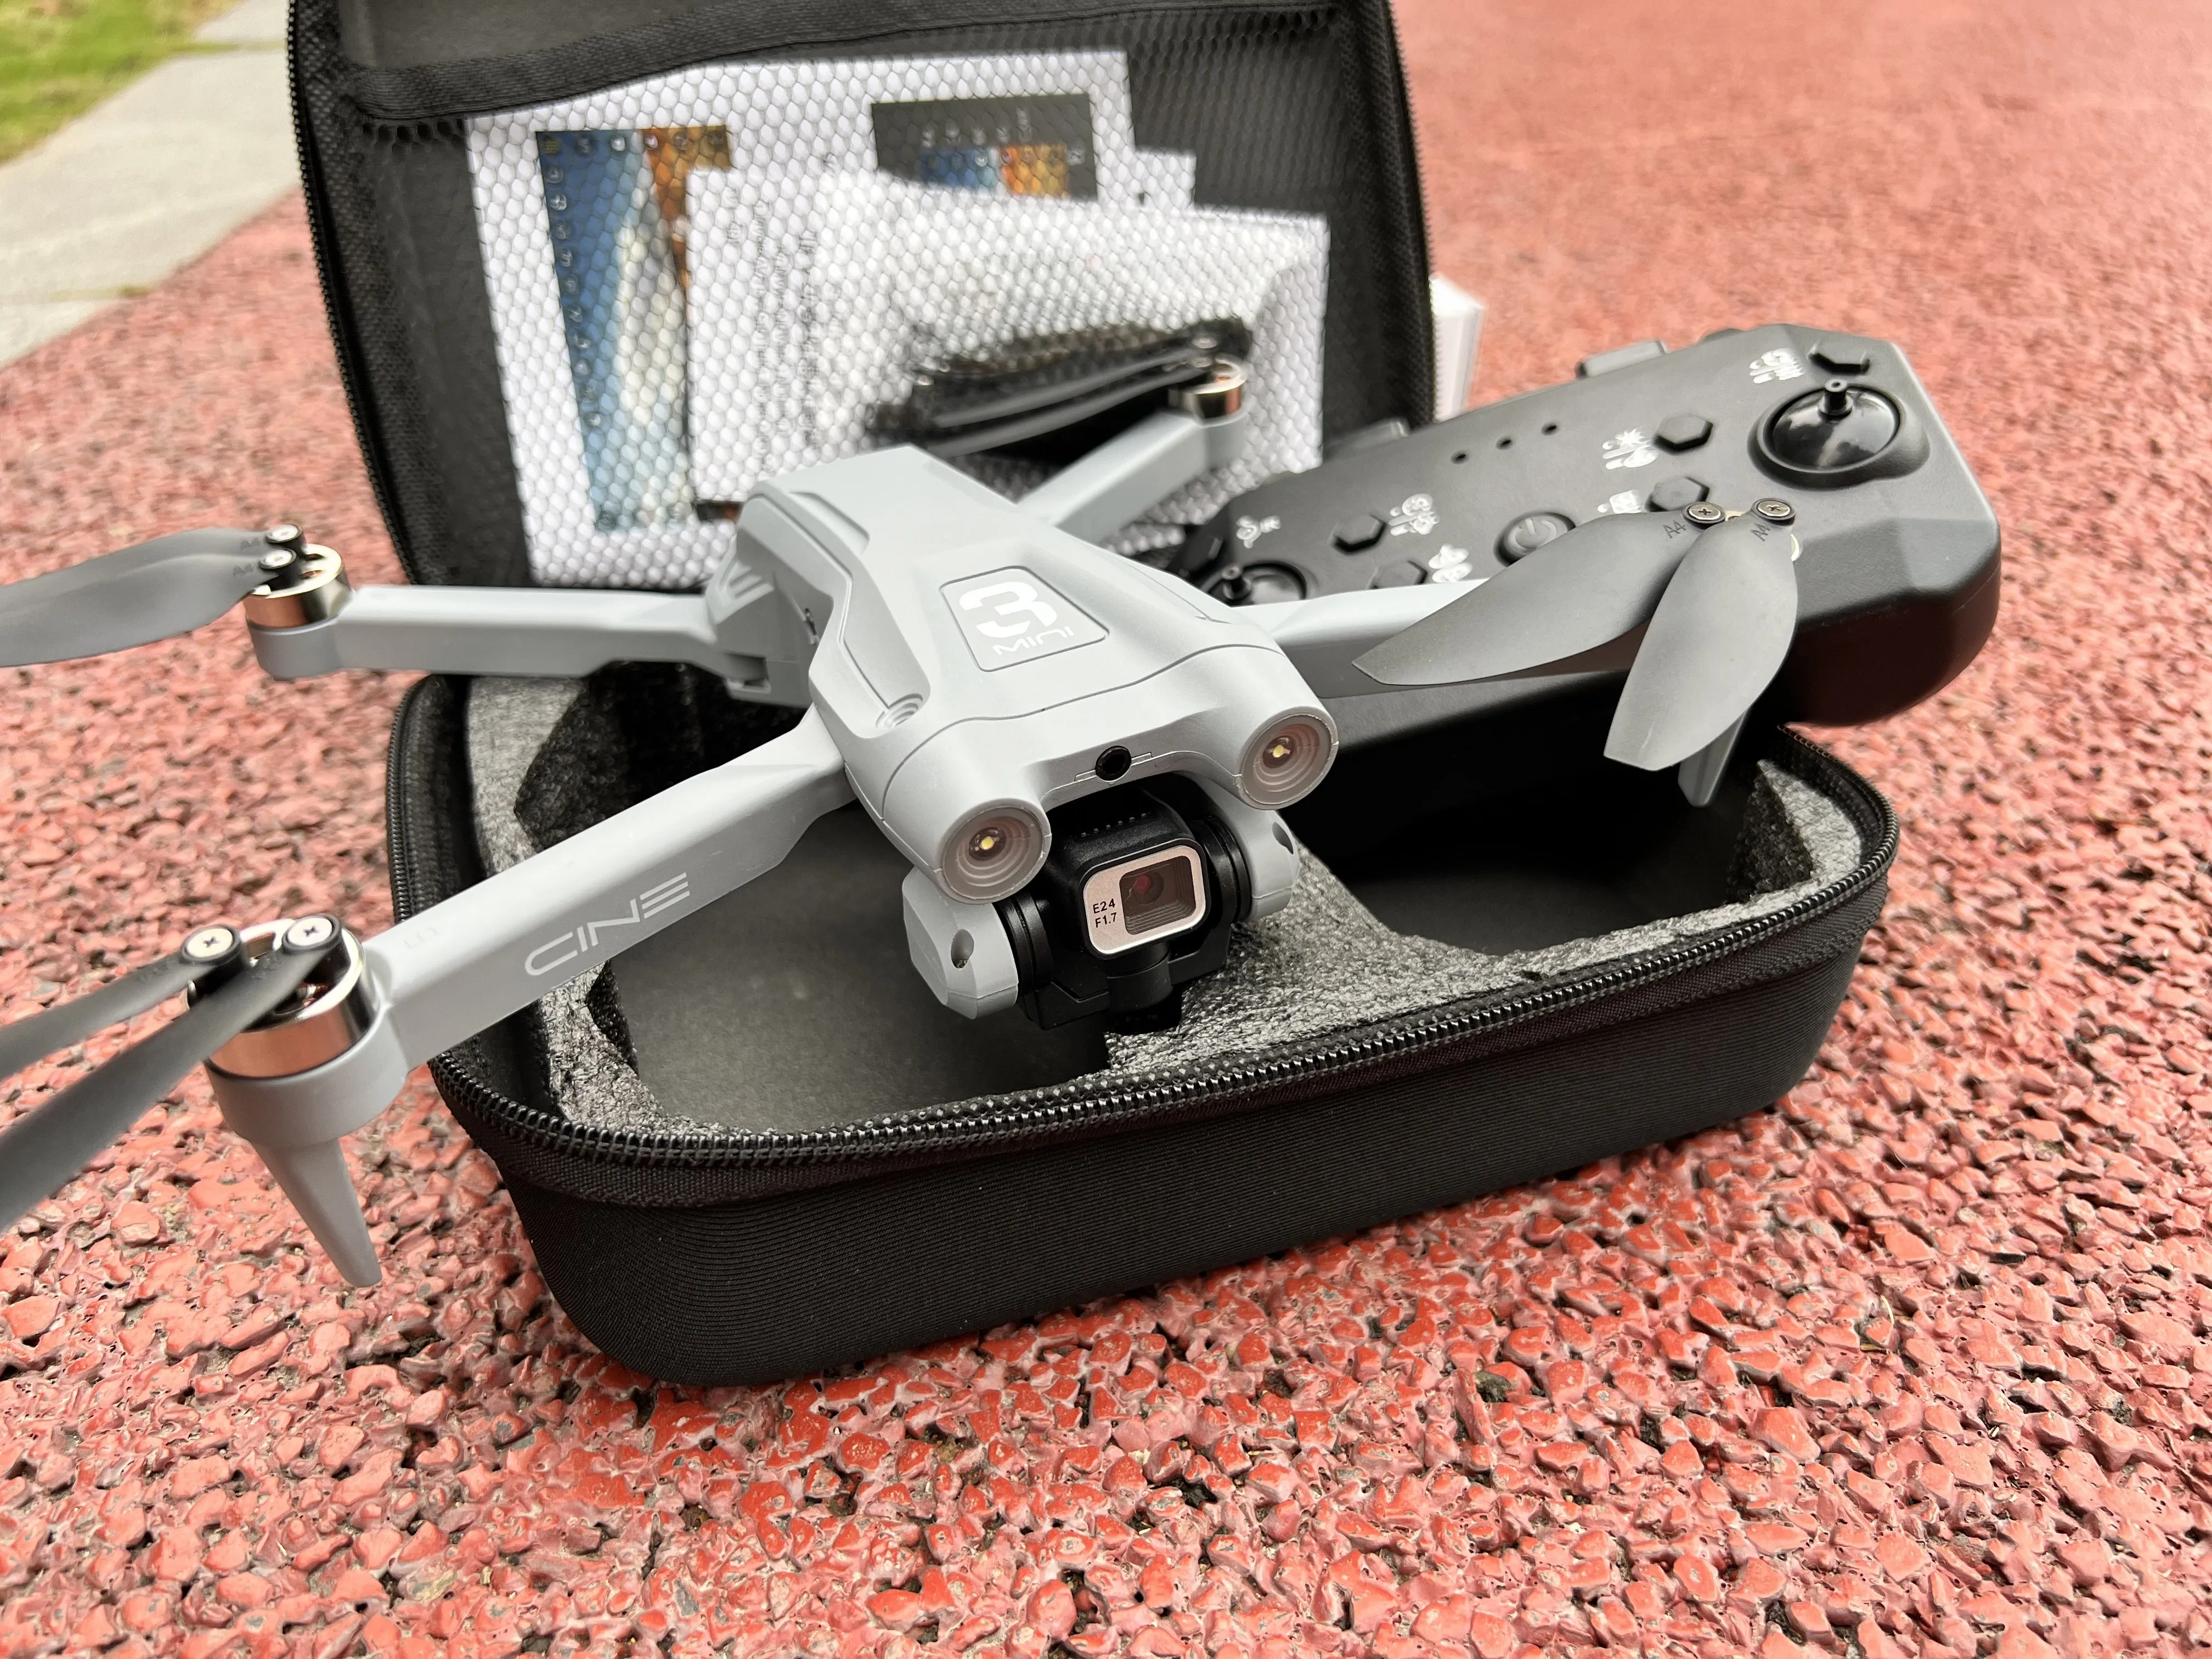 New Z908Max Dual8K GPS 9KM Professional Drone WIFI FPV Obstacle Avoidance Brushless Four-Axis Folding Rc Quadcopter Toy Gift photo review